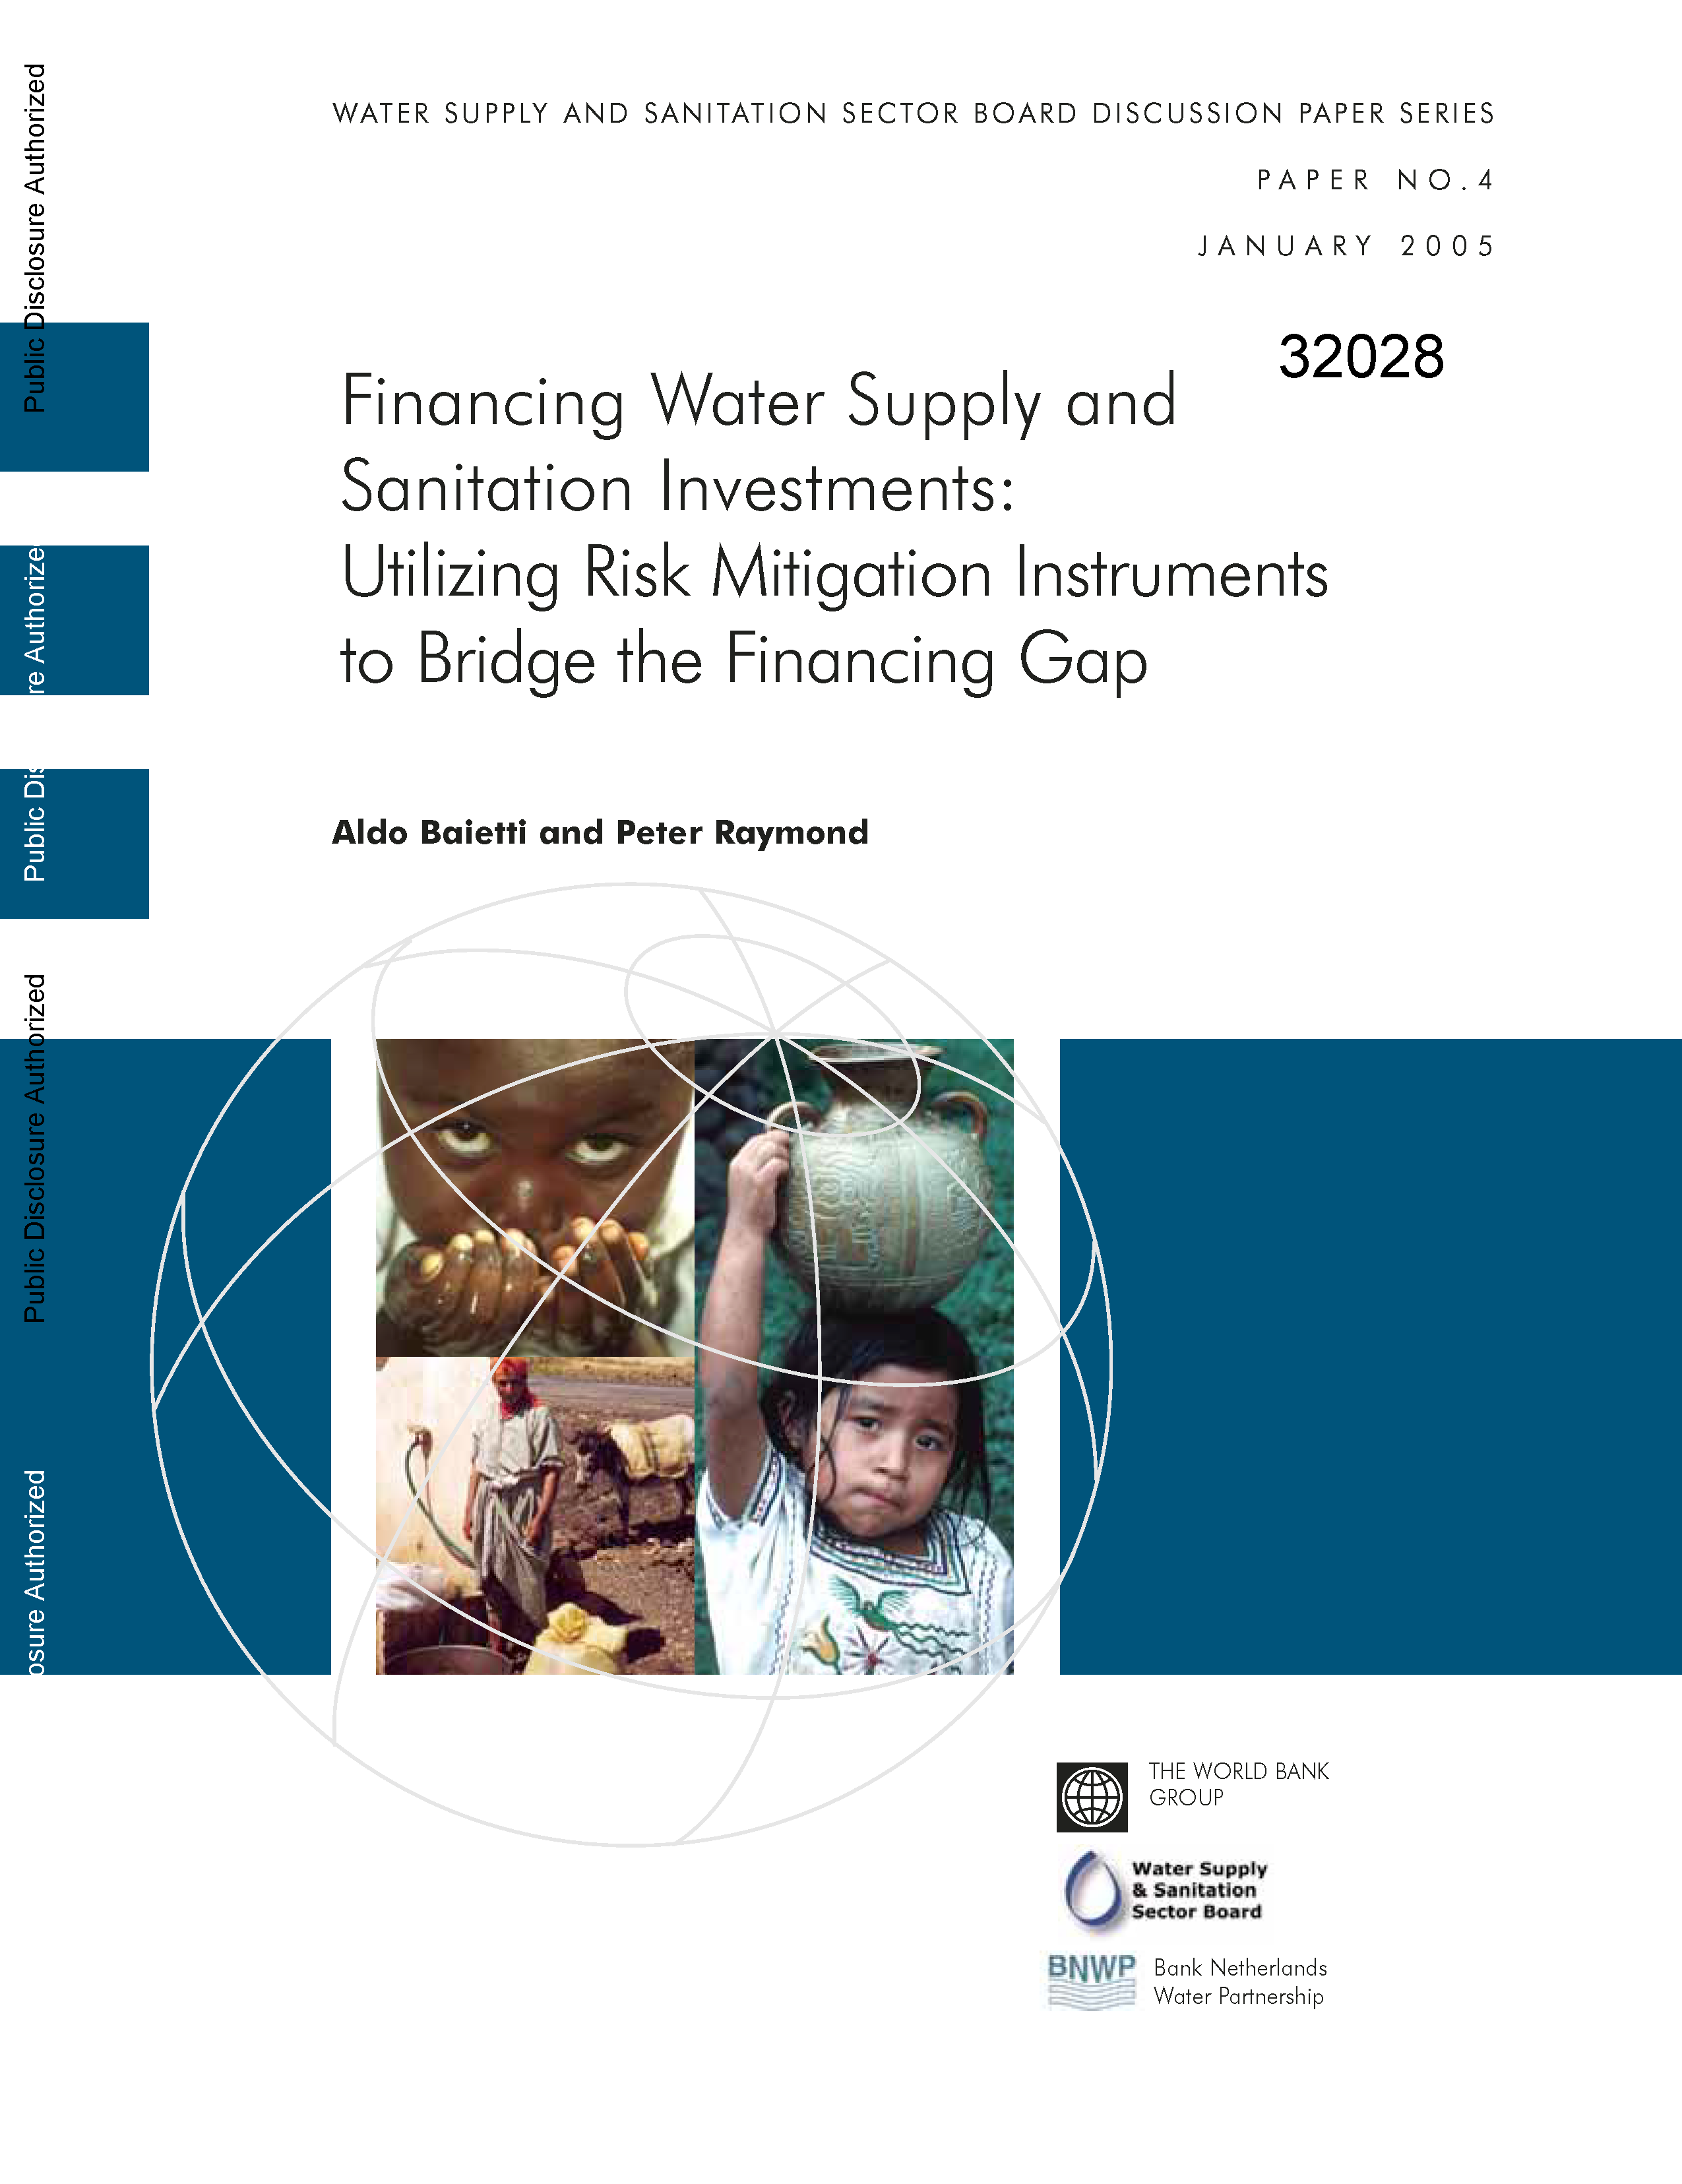 Cover page for Financing Water Supply and Sanitation Investments: Utilizing Risk Mitigation Instruments to Bridge the Financing Gap